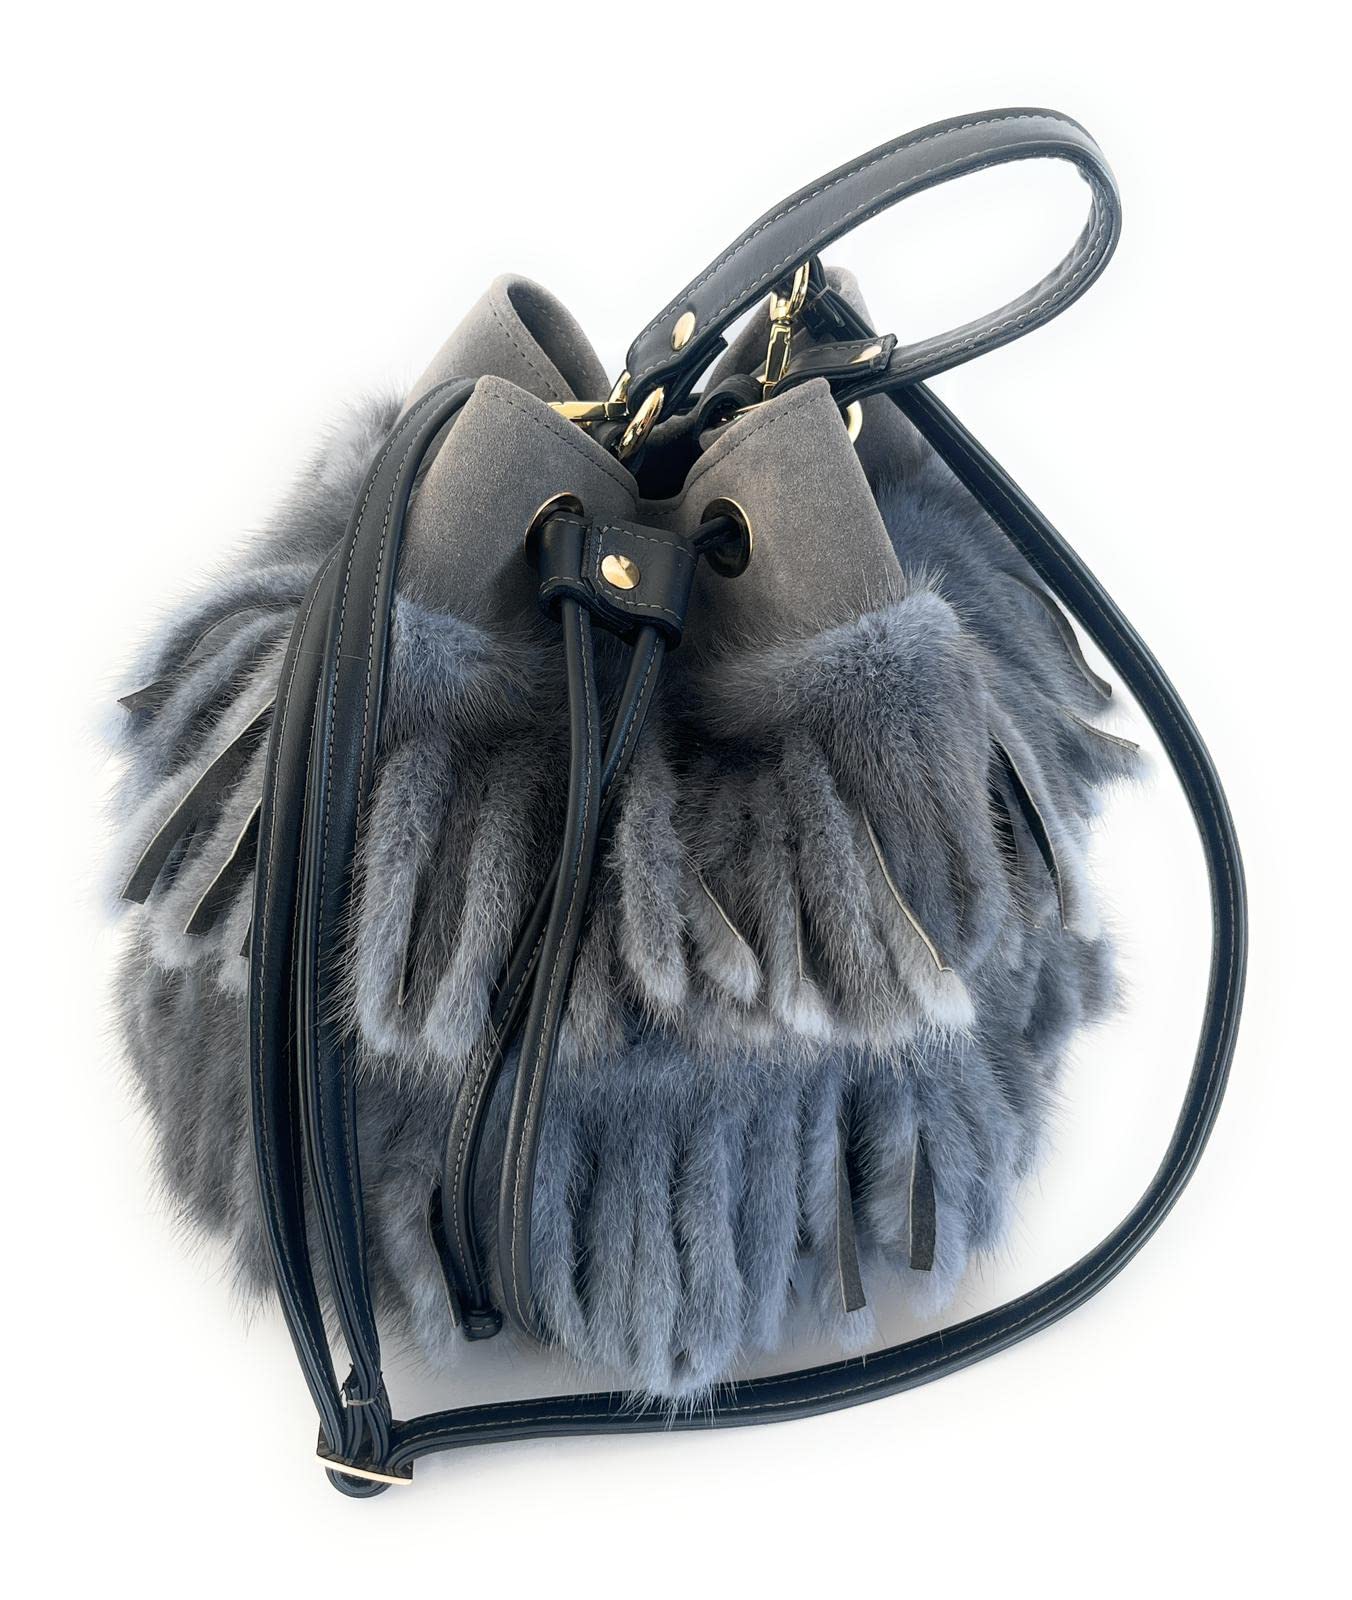 Gray Women's Bag in suede leather and mink fur designed by Marika De Paola, handmade, high craftsmanship Made in Italy